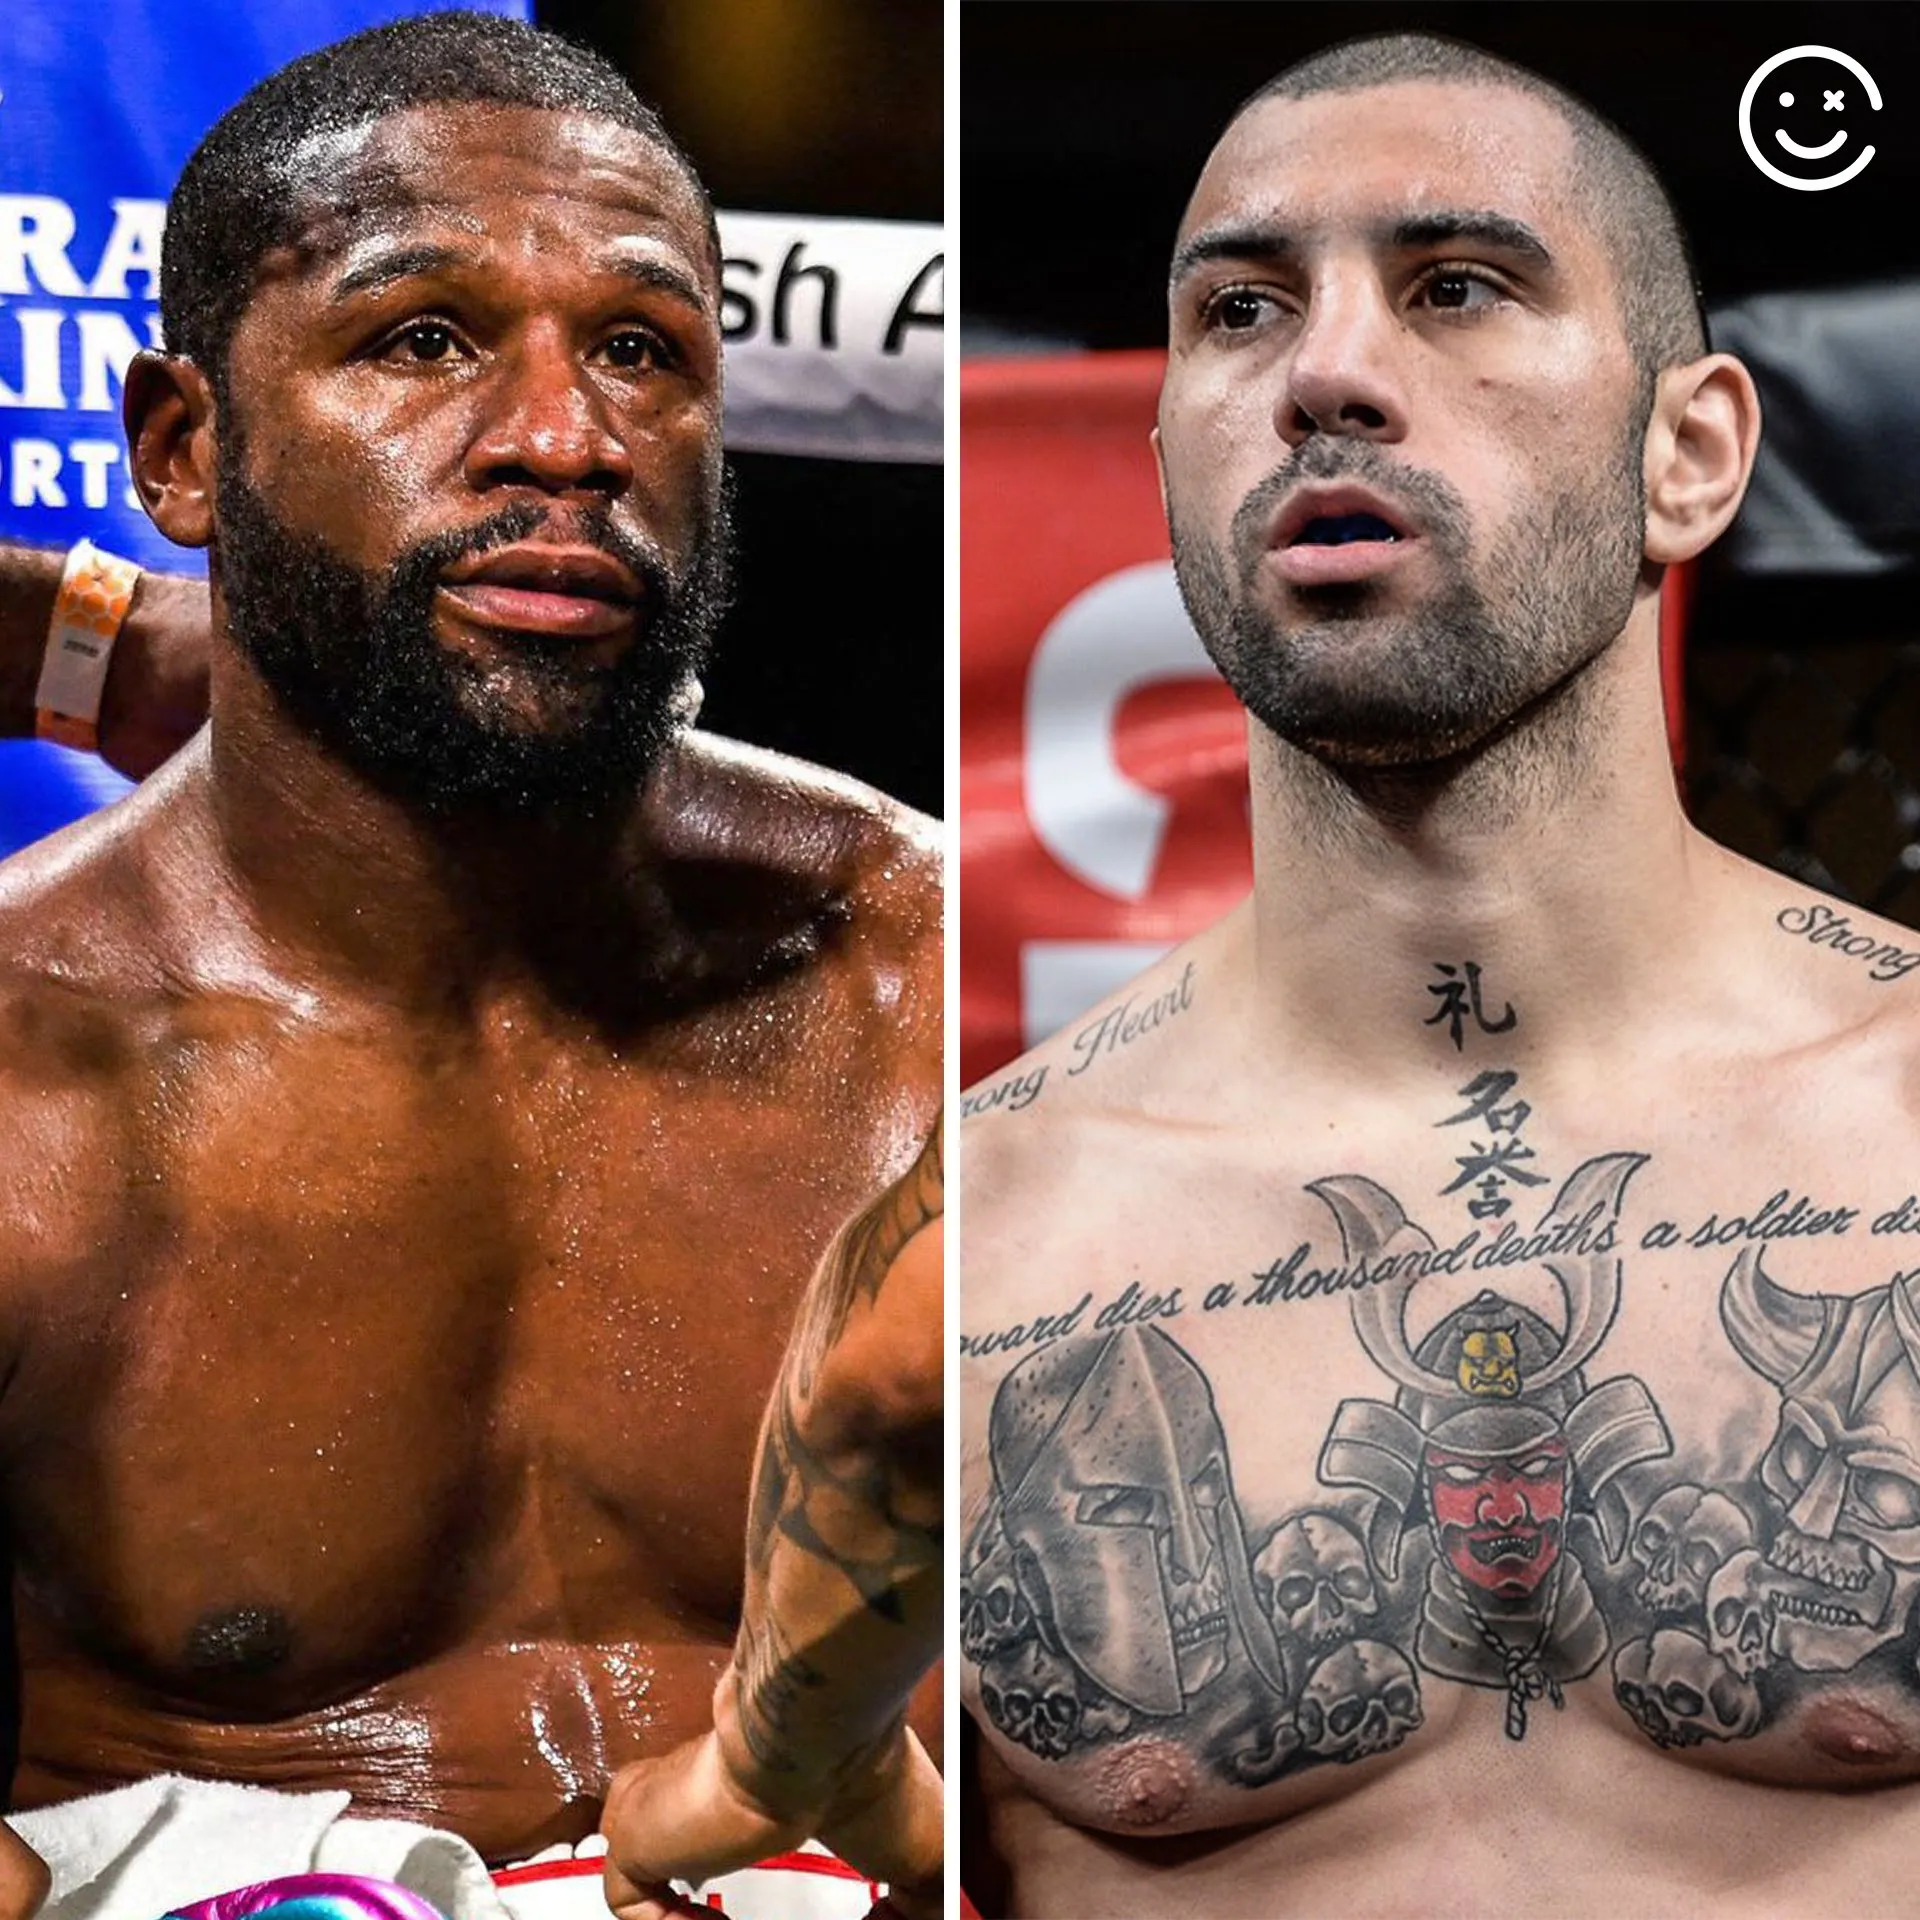 Happy Punch on X: "Floyd Mayweather will face John Gotti III in an  exhibition bout on June 11th in Florida Gotti is 5-1 as an MMA fighter and  2-0 as a professional